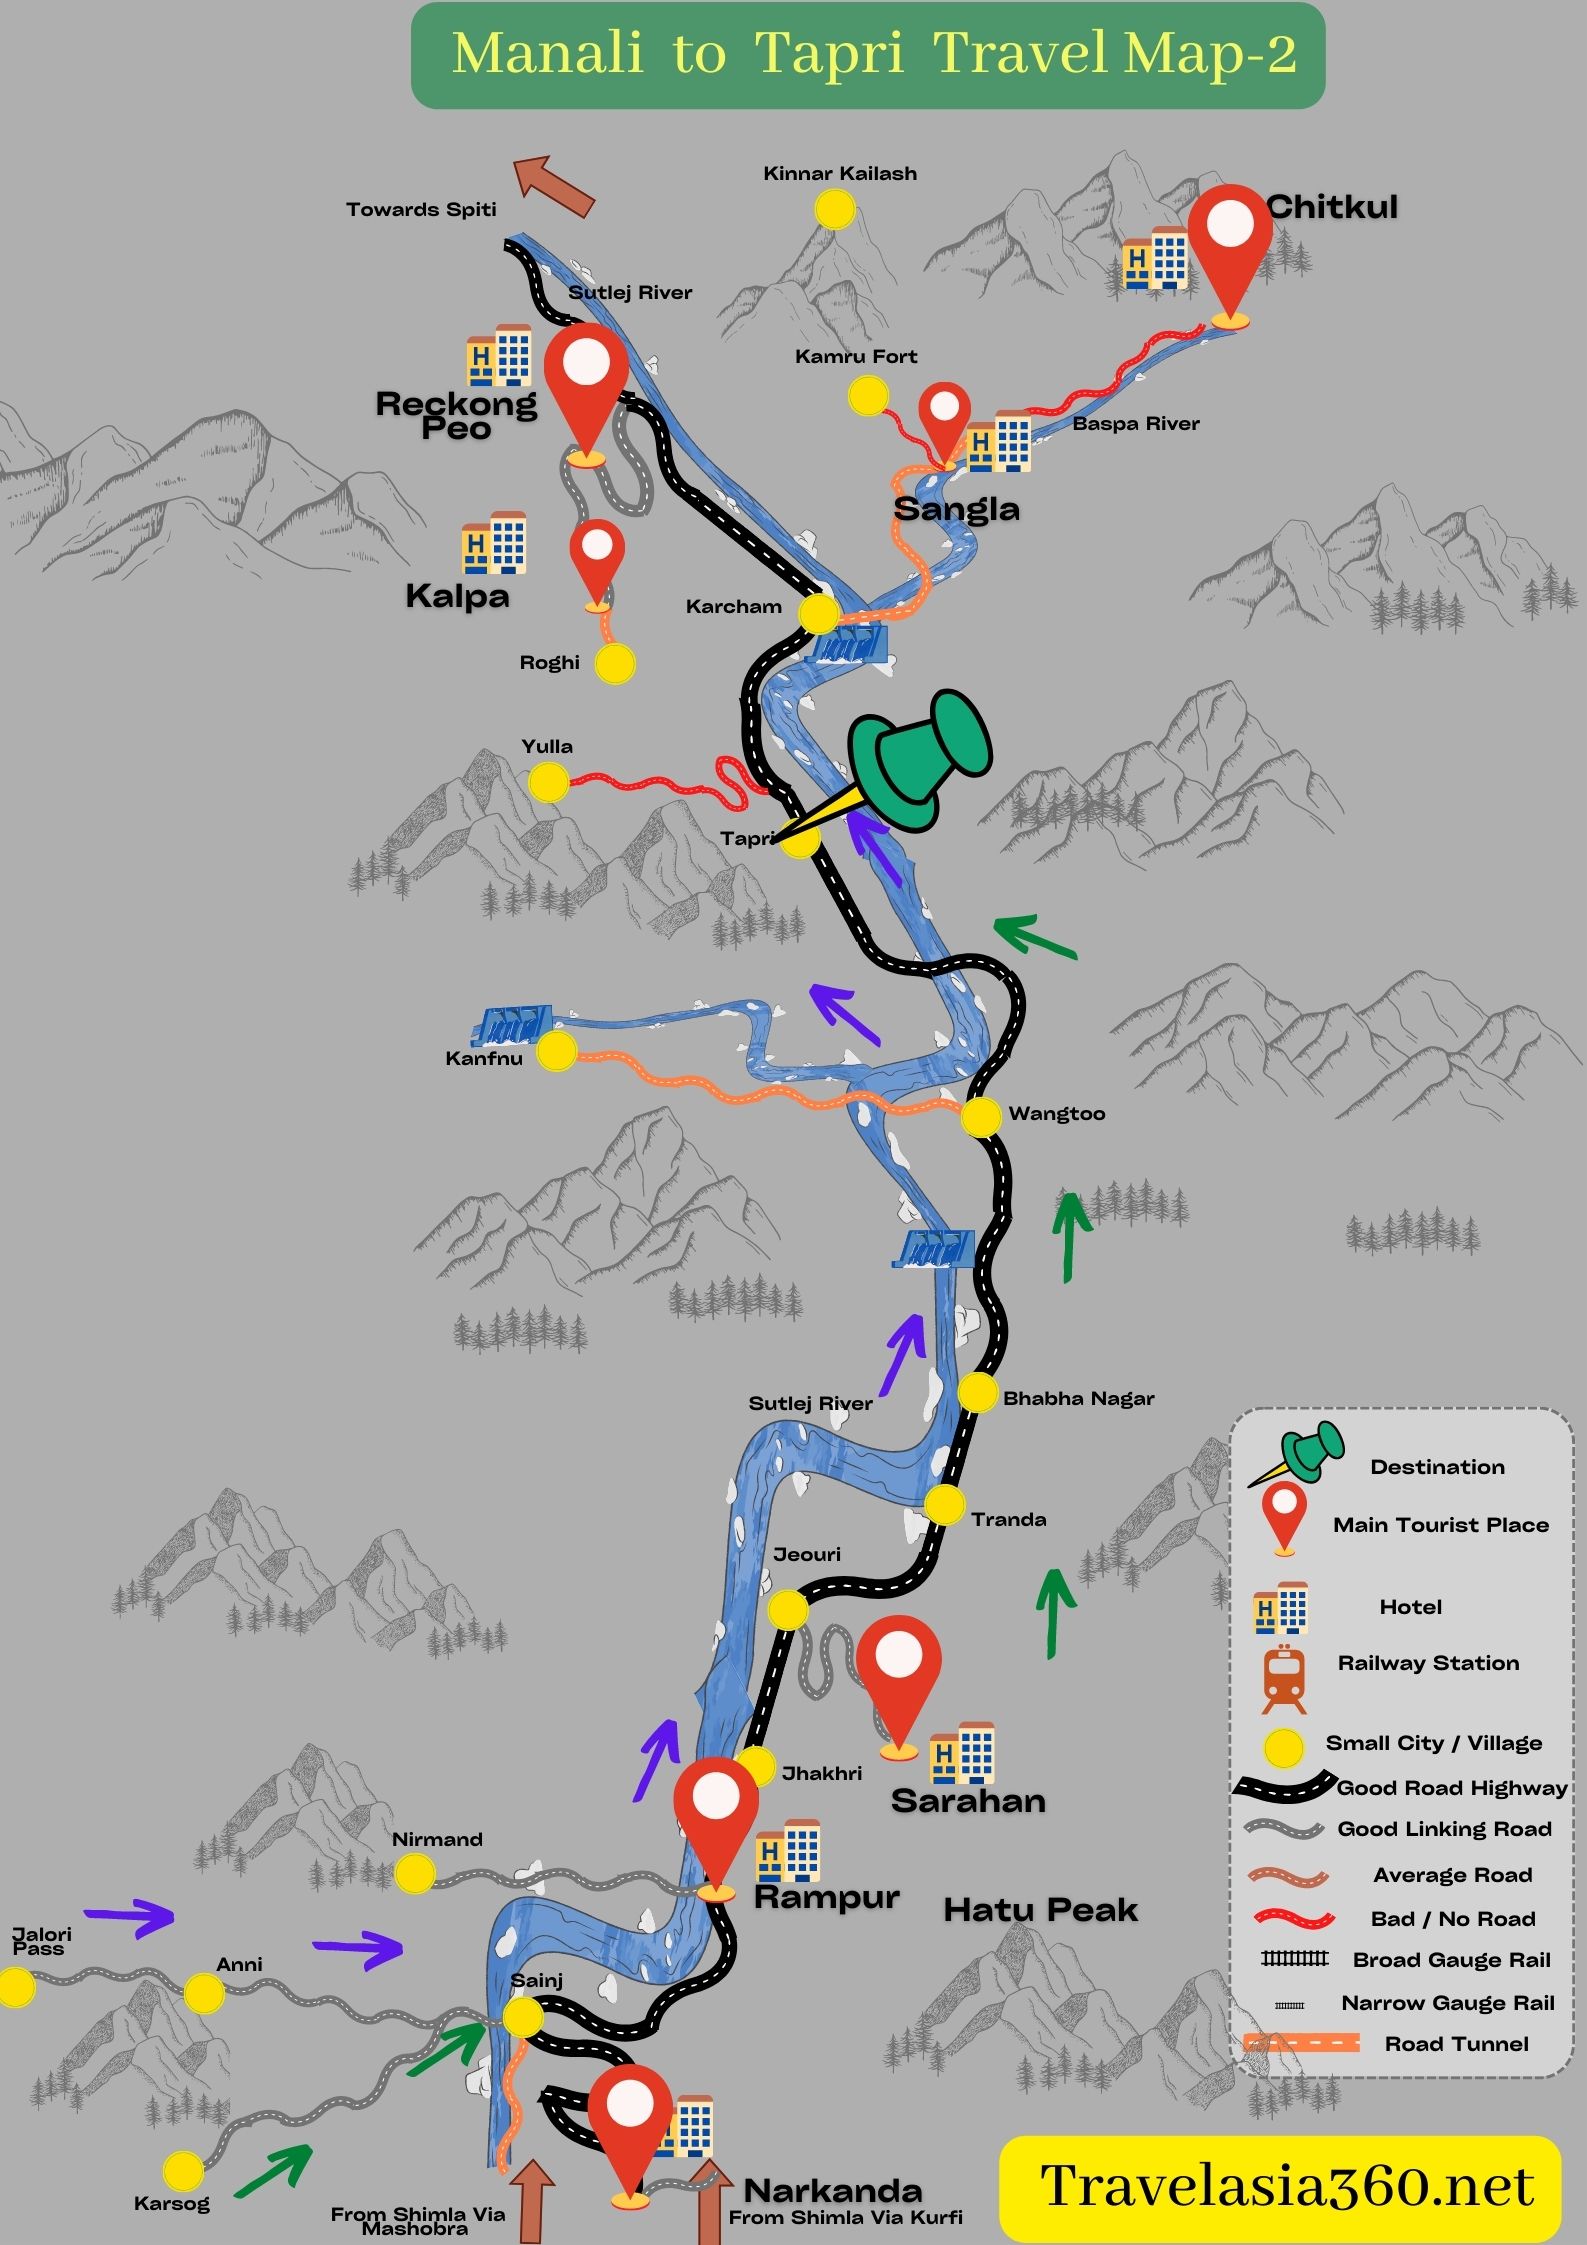 how to reach Tapri from Manali